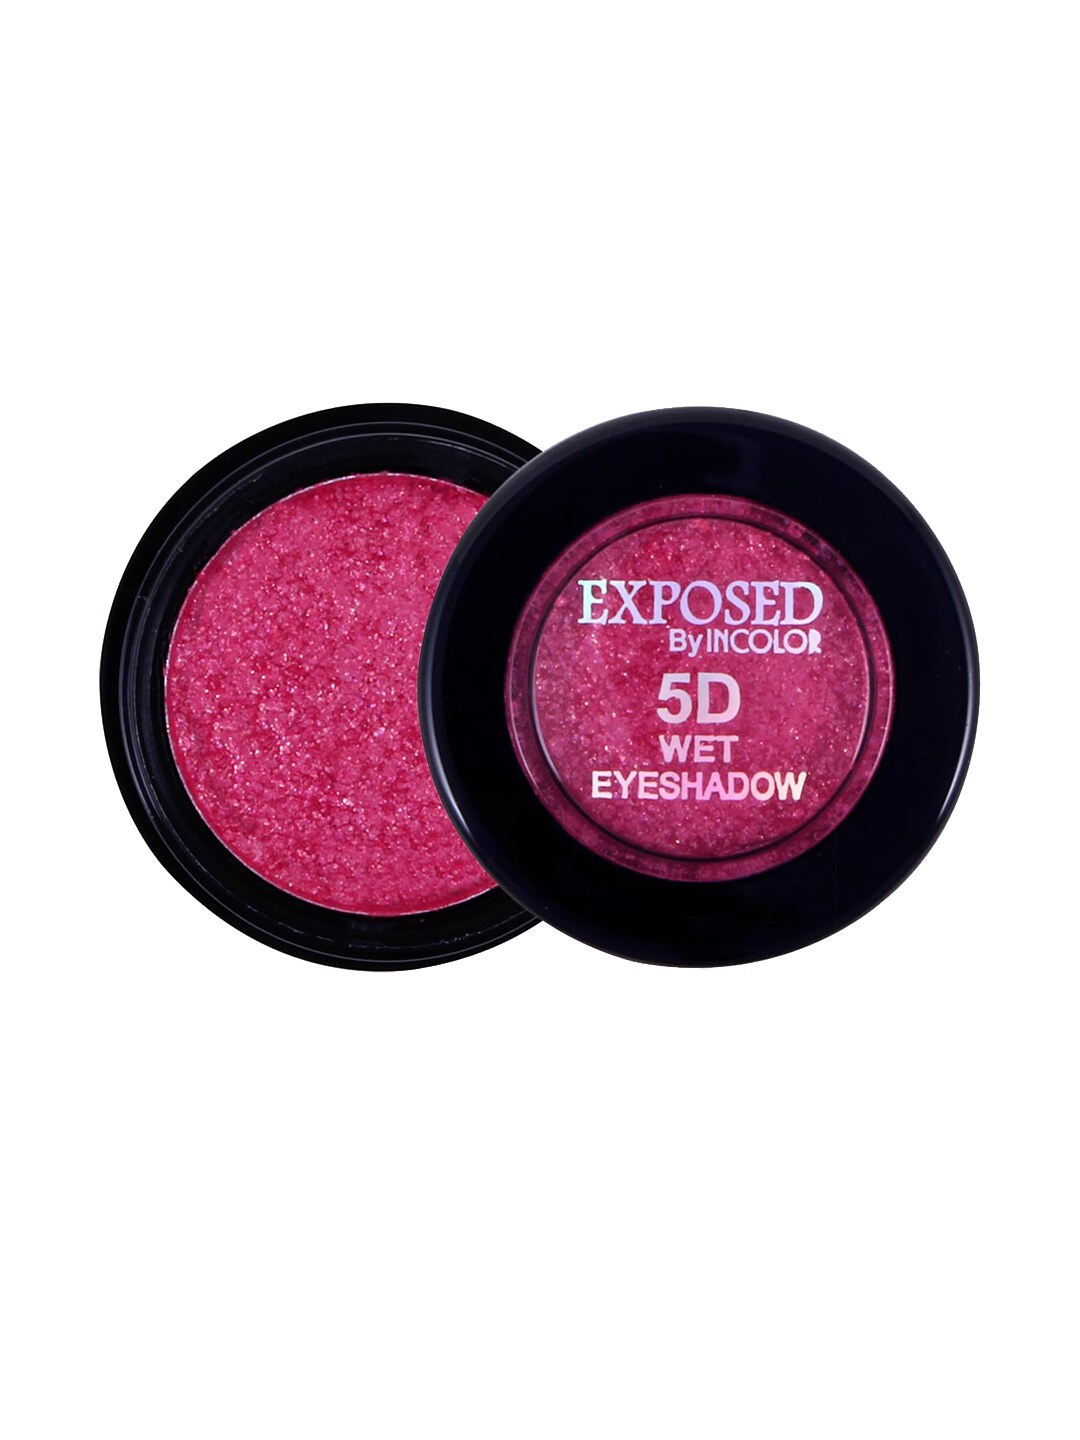 INCOLOR Pink 5D 15 Wet Eyeshadow 4.5g Price in India